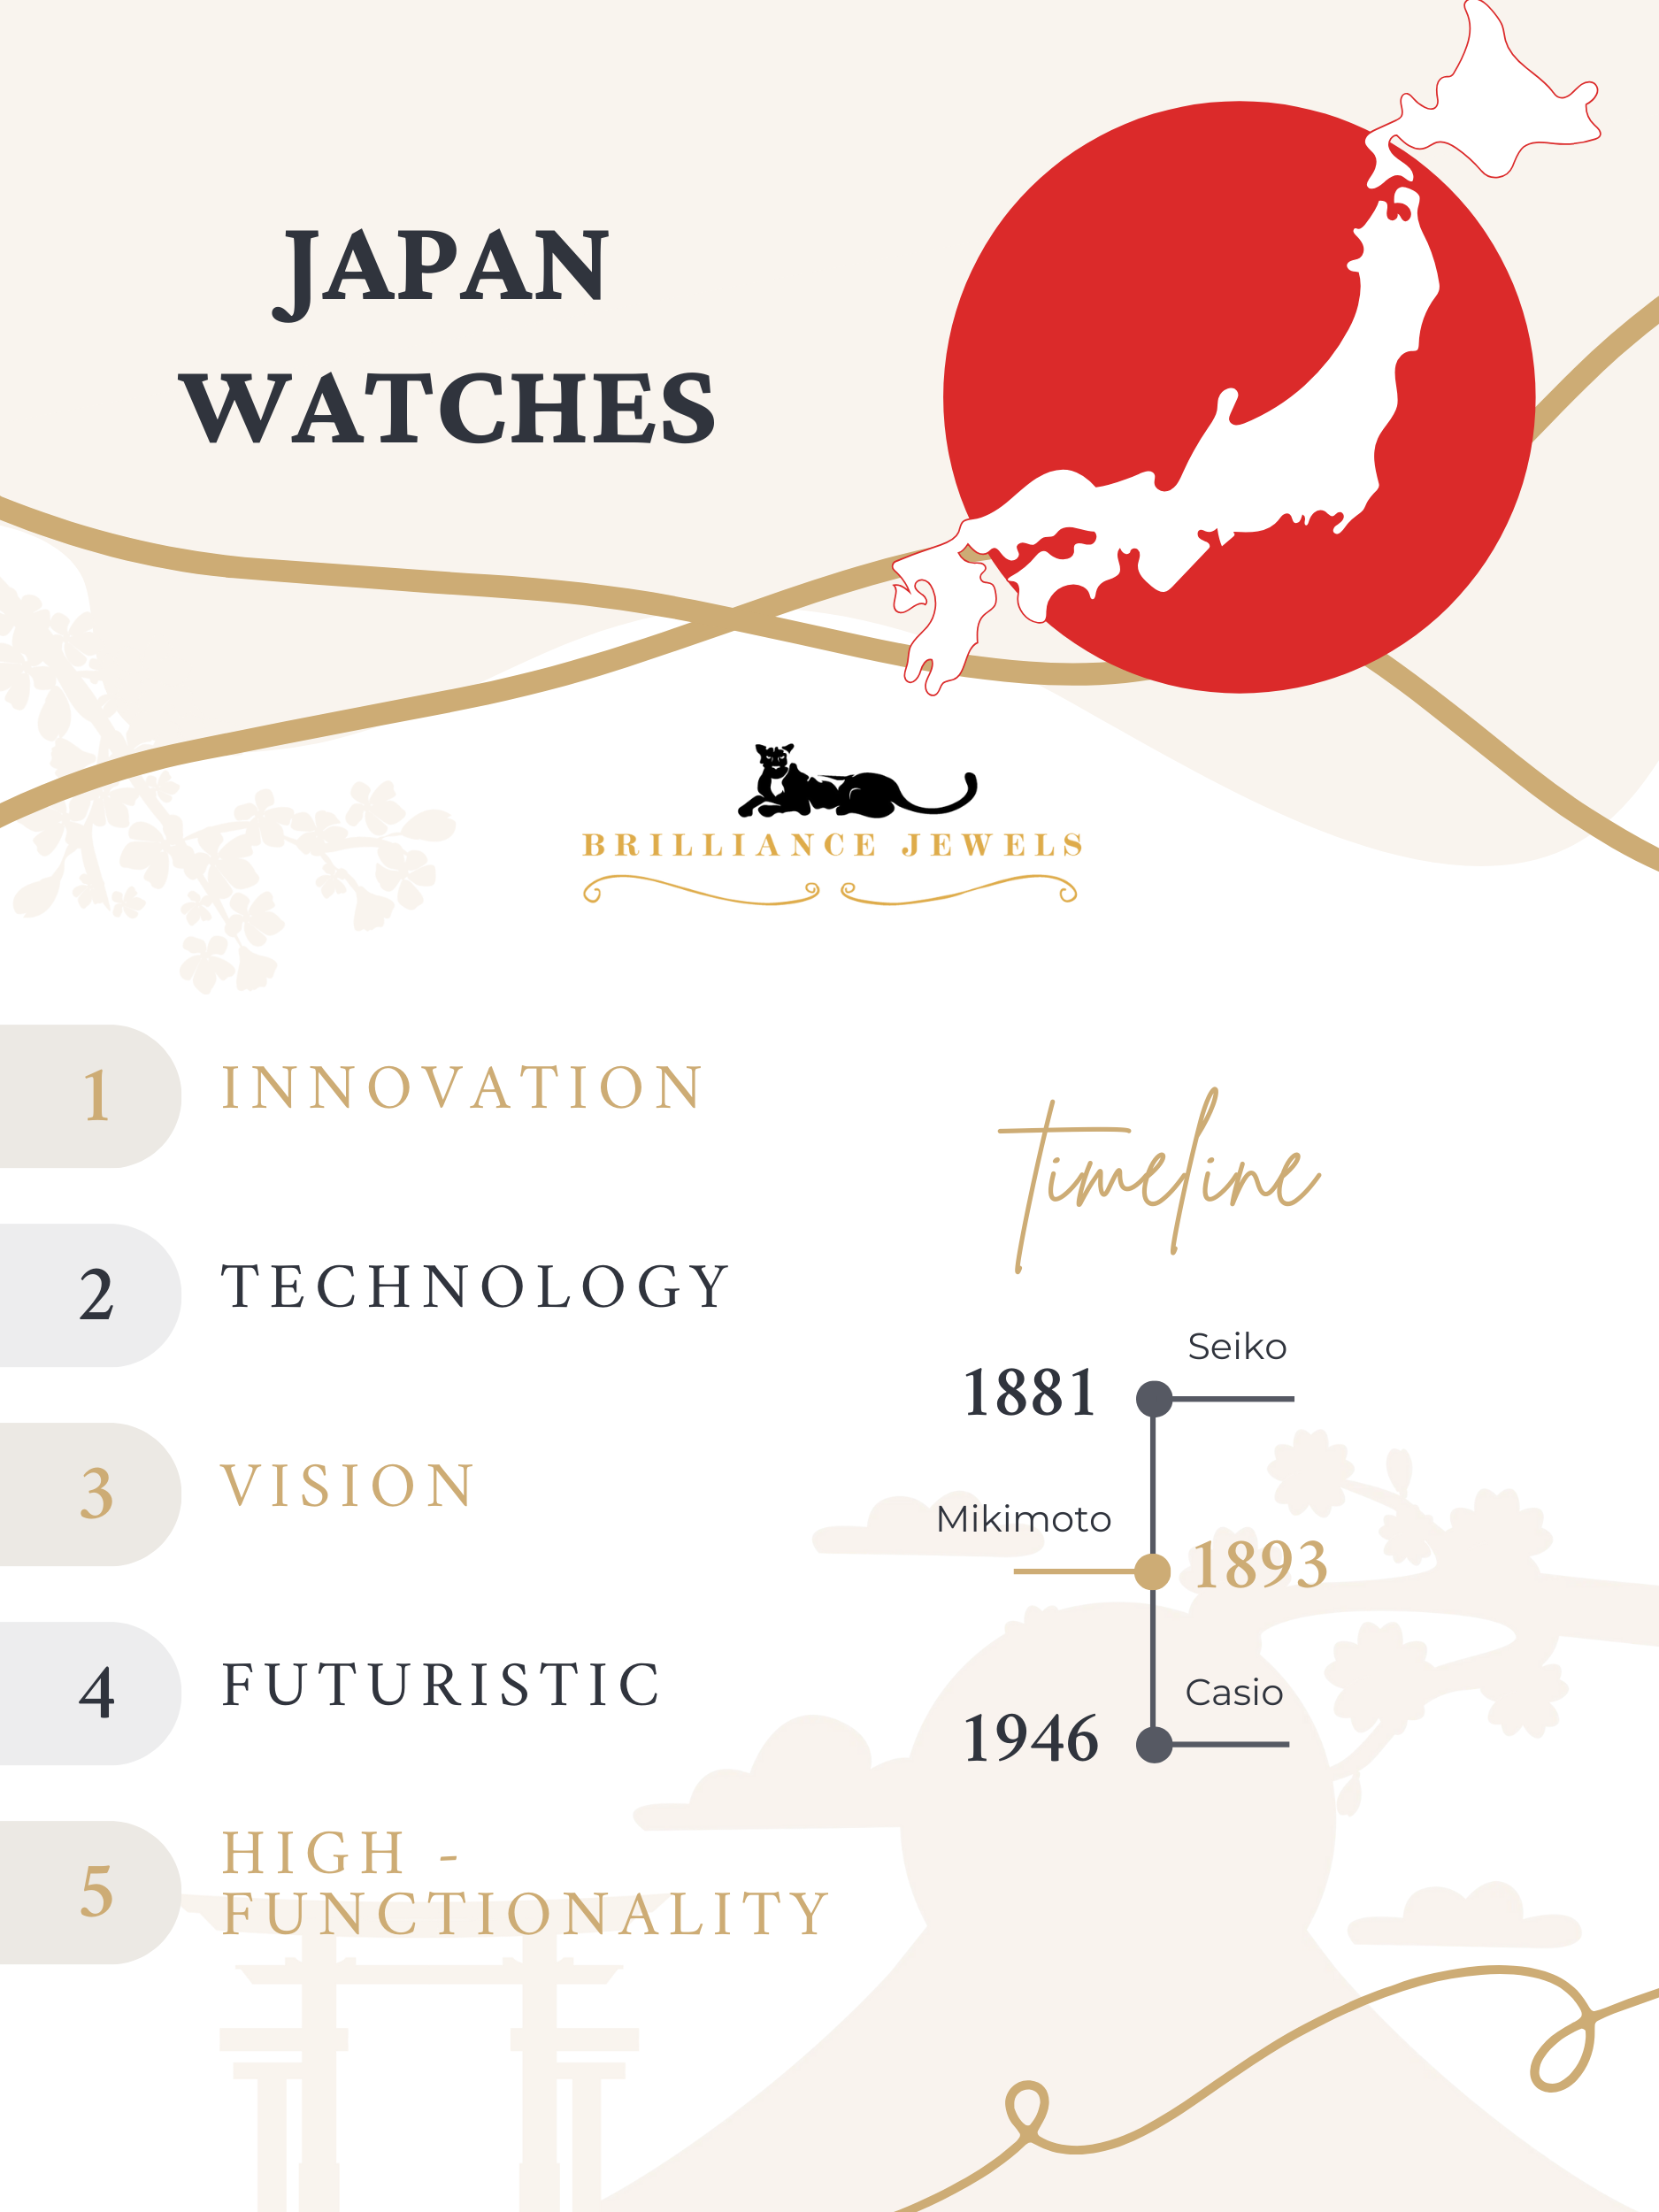 Japan watches